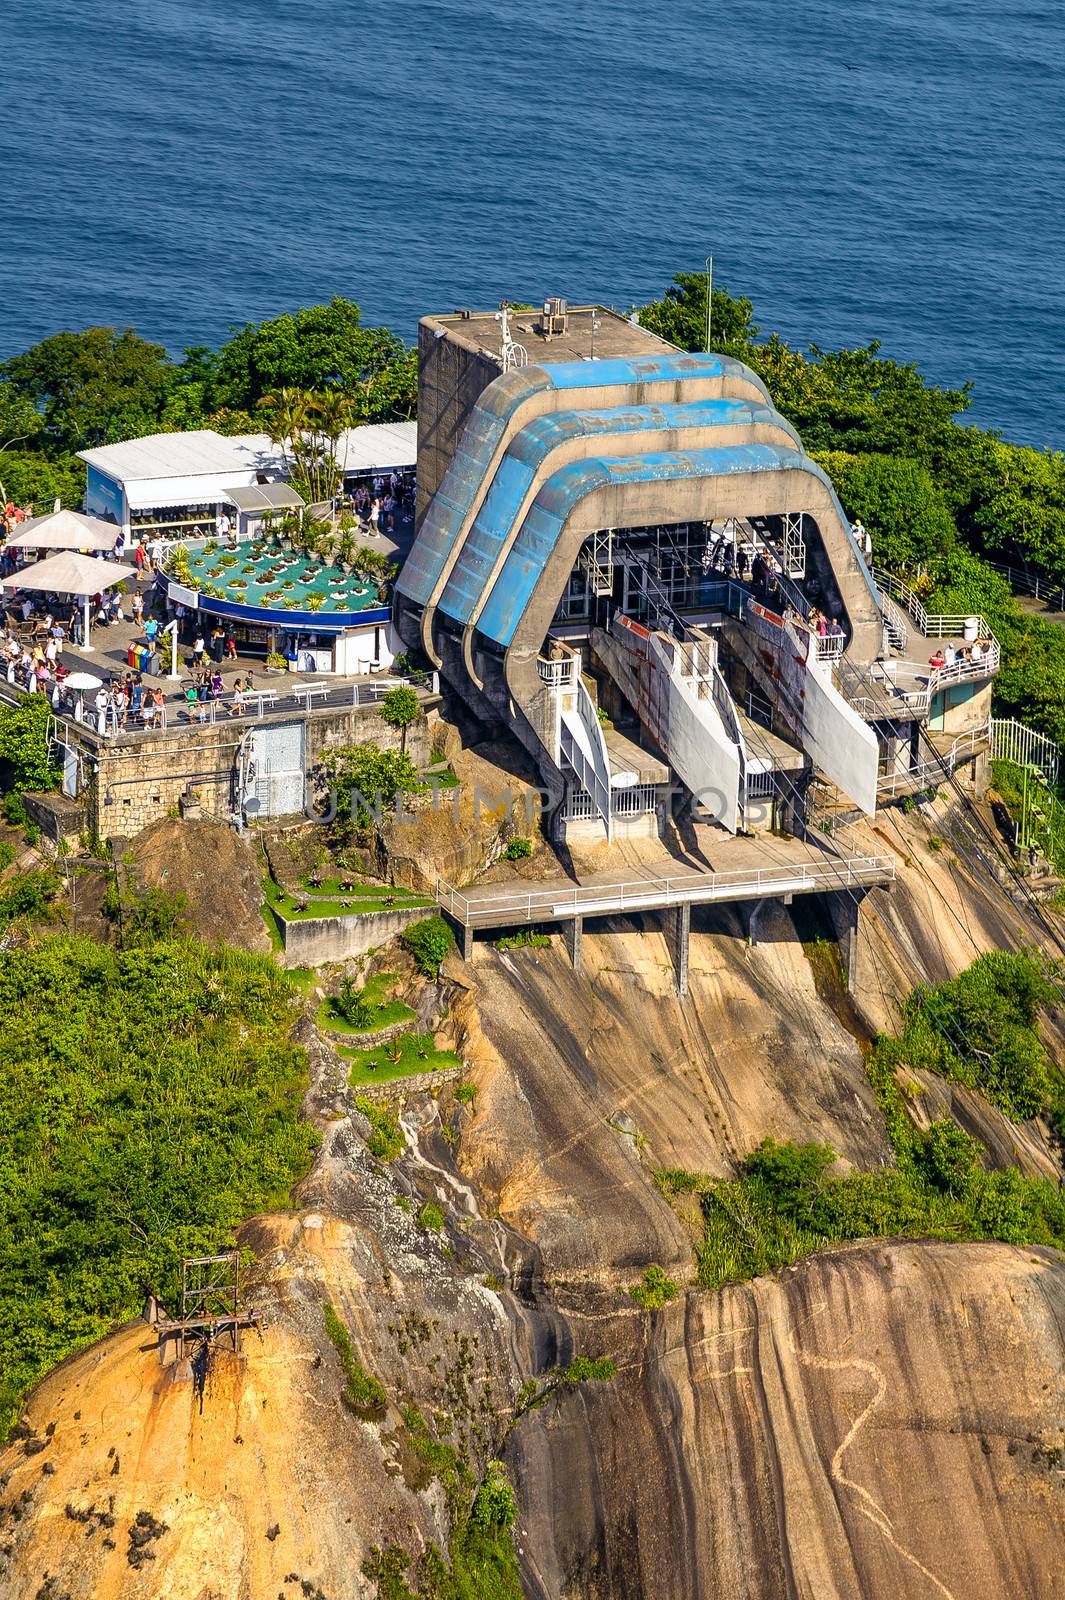 Aerial view of overhead cable car station on a mountain, Sugarloaf Mountain, Guanabara Bay, Rio De Janeiro, Brazil